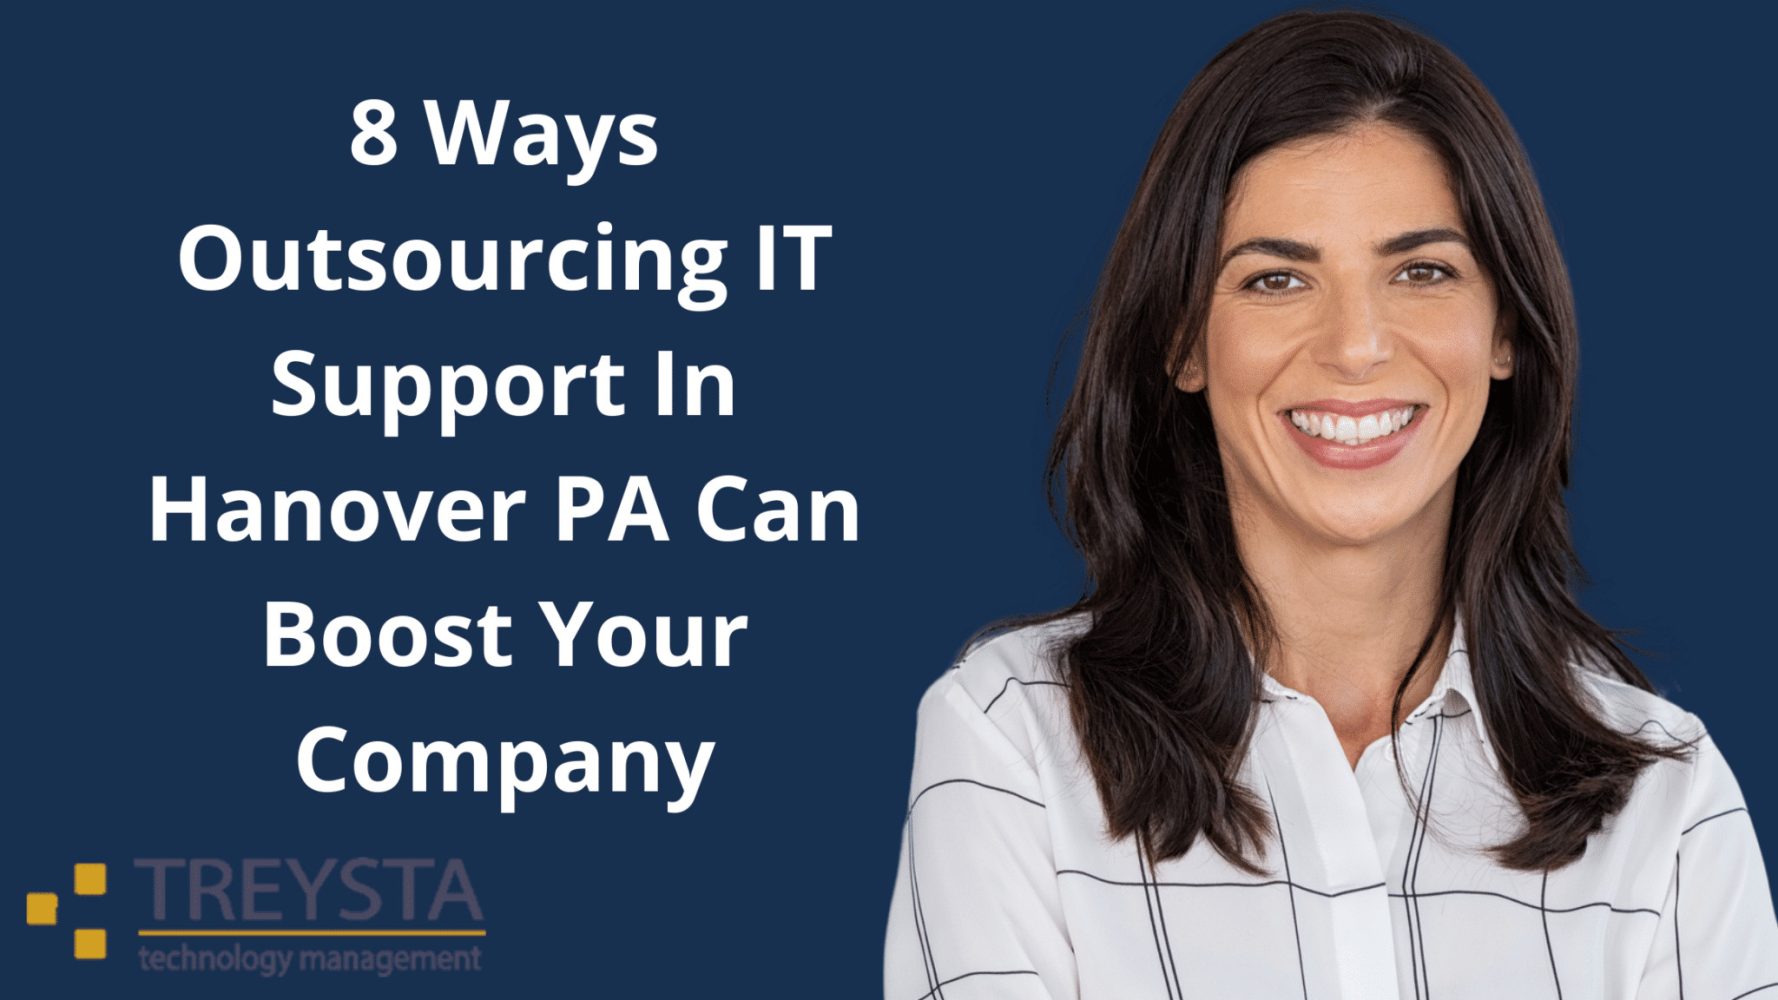 8 Ways Outsourcing IT Support In Hanover PA Can Boost Your Company